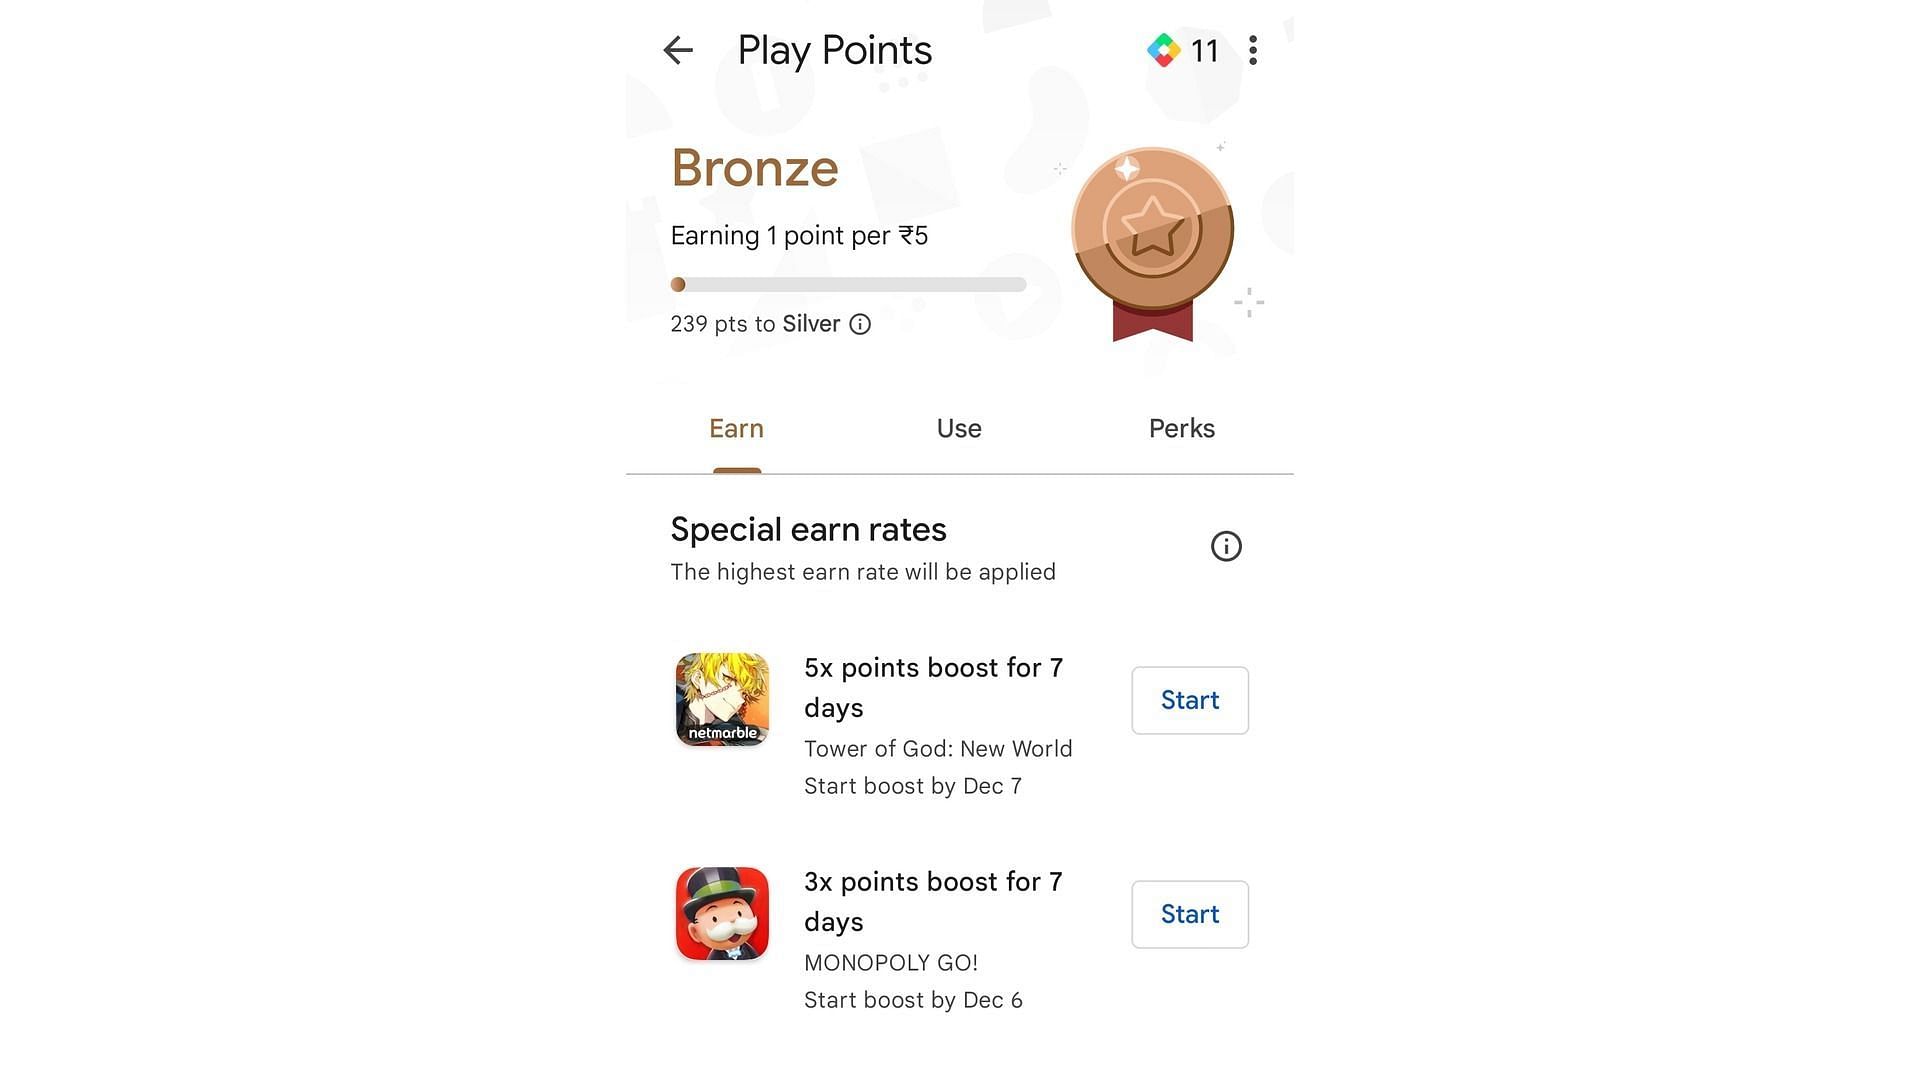 Play Points can get you free UCs (Image via Google Play Store)